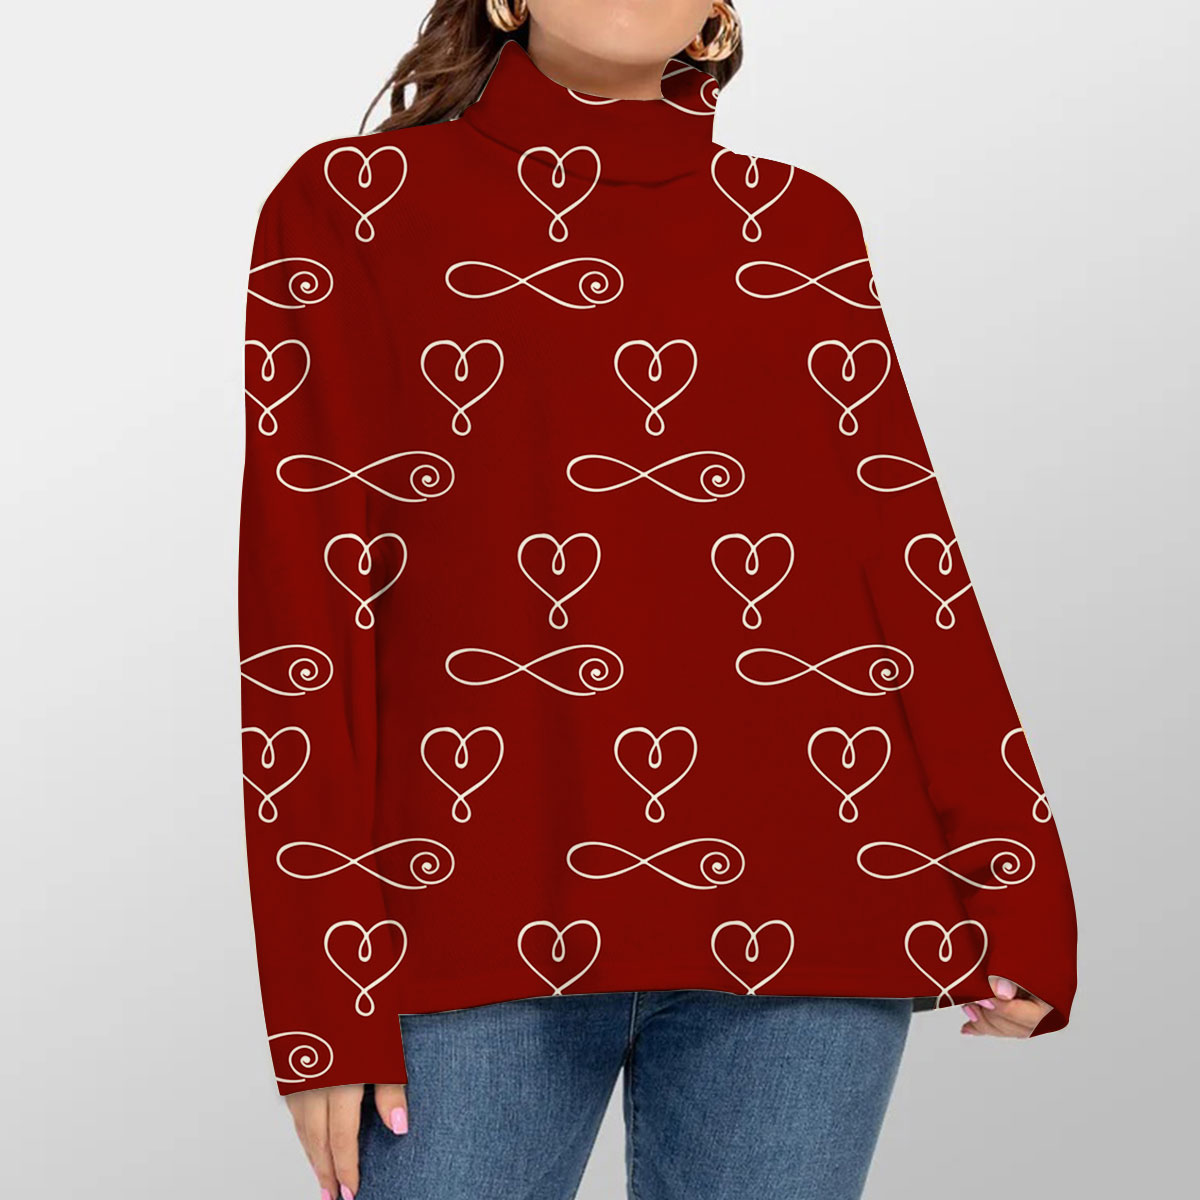 Bohemian With Hearts And Signs Of Infinity Turtleneck Sweater